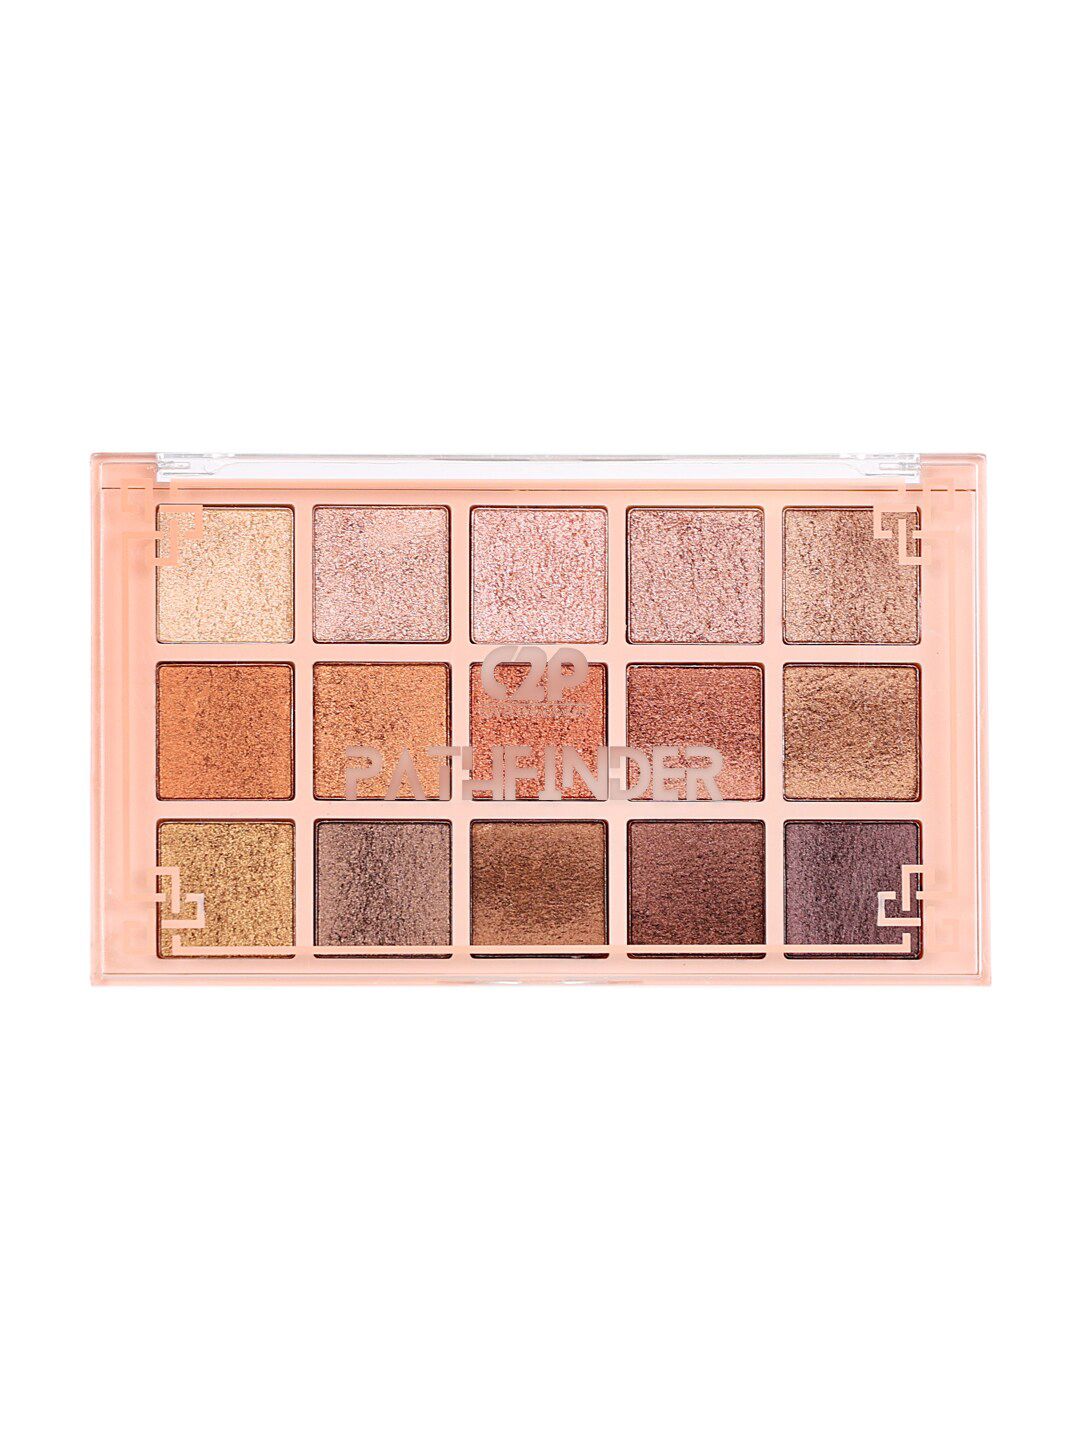 C2P PROFESSIONAL MAKEUP Pathfinder 15 Color Eyeshadow Palette - Burned Almond 06 Price in India